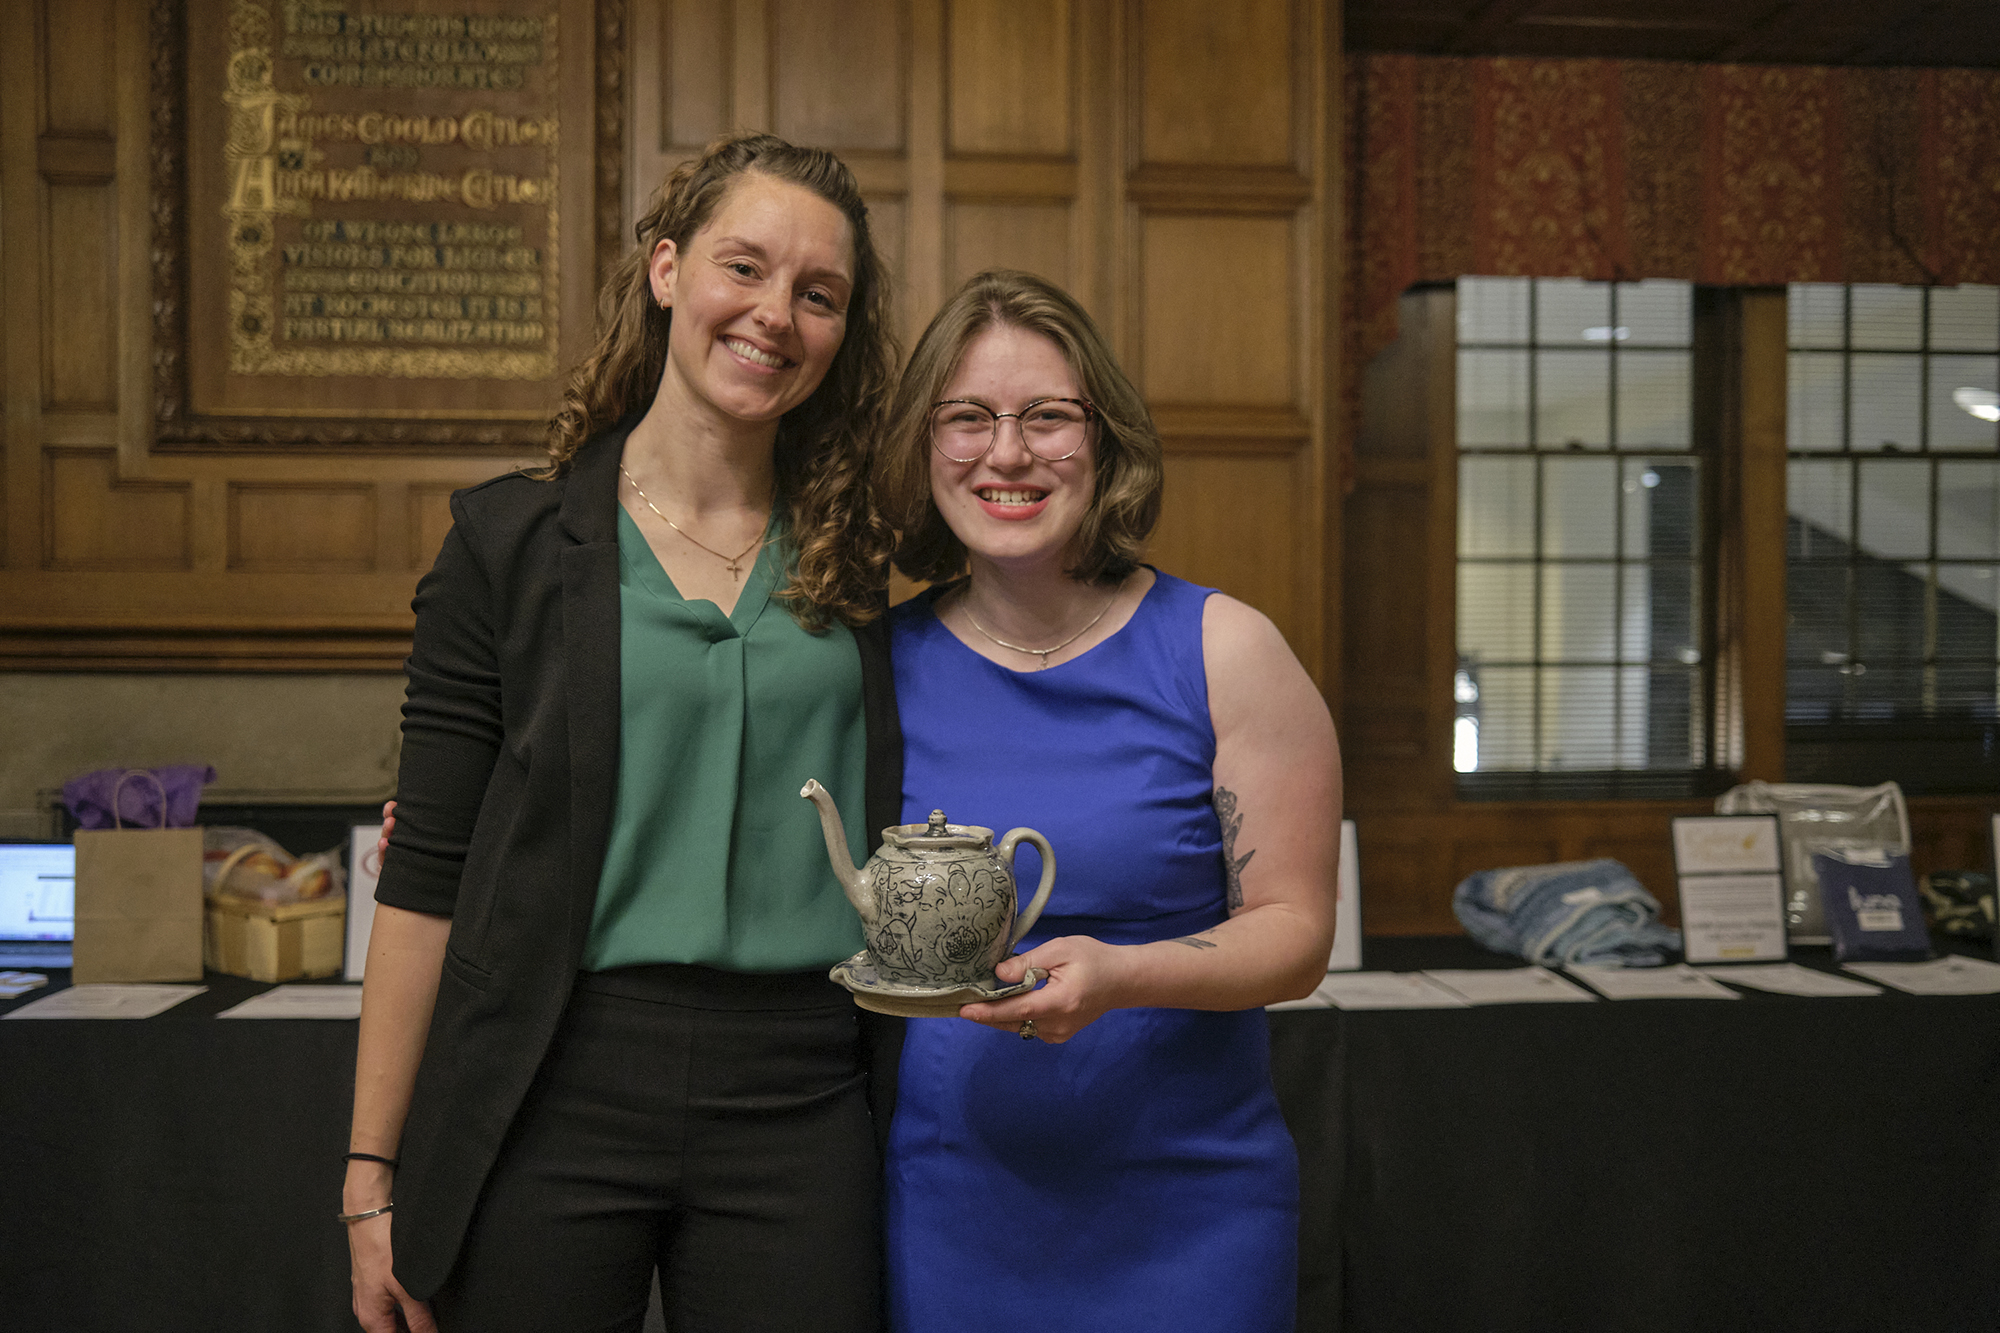 Emma Herz holds one of her teapots while standing next to another person.